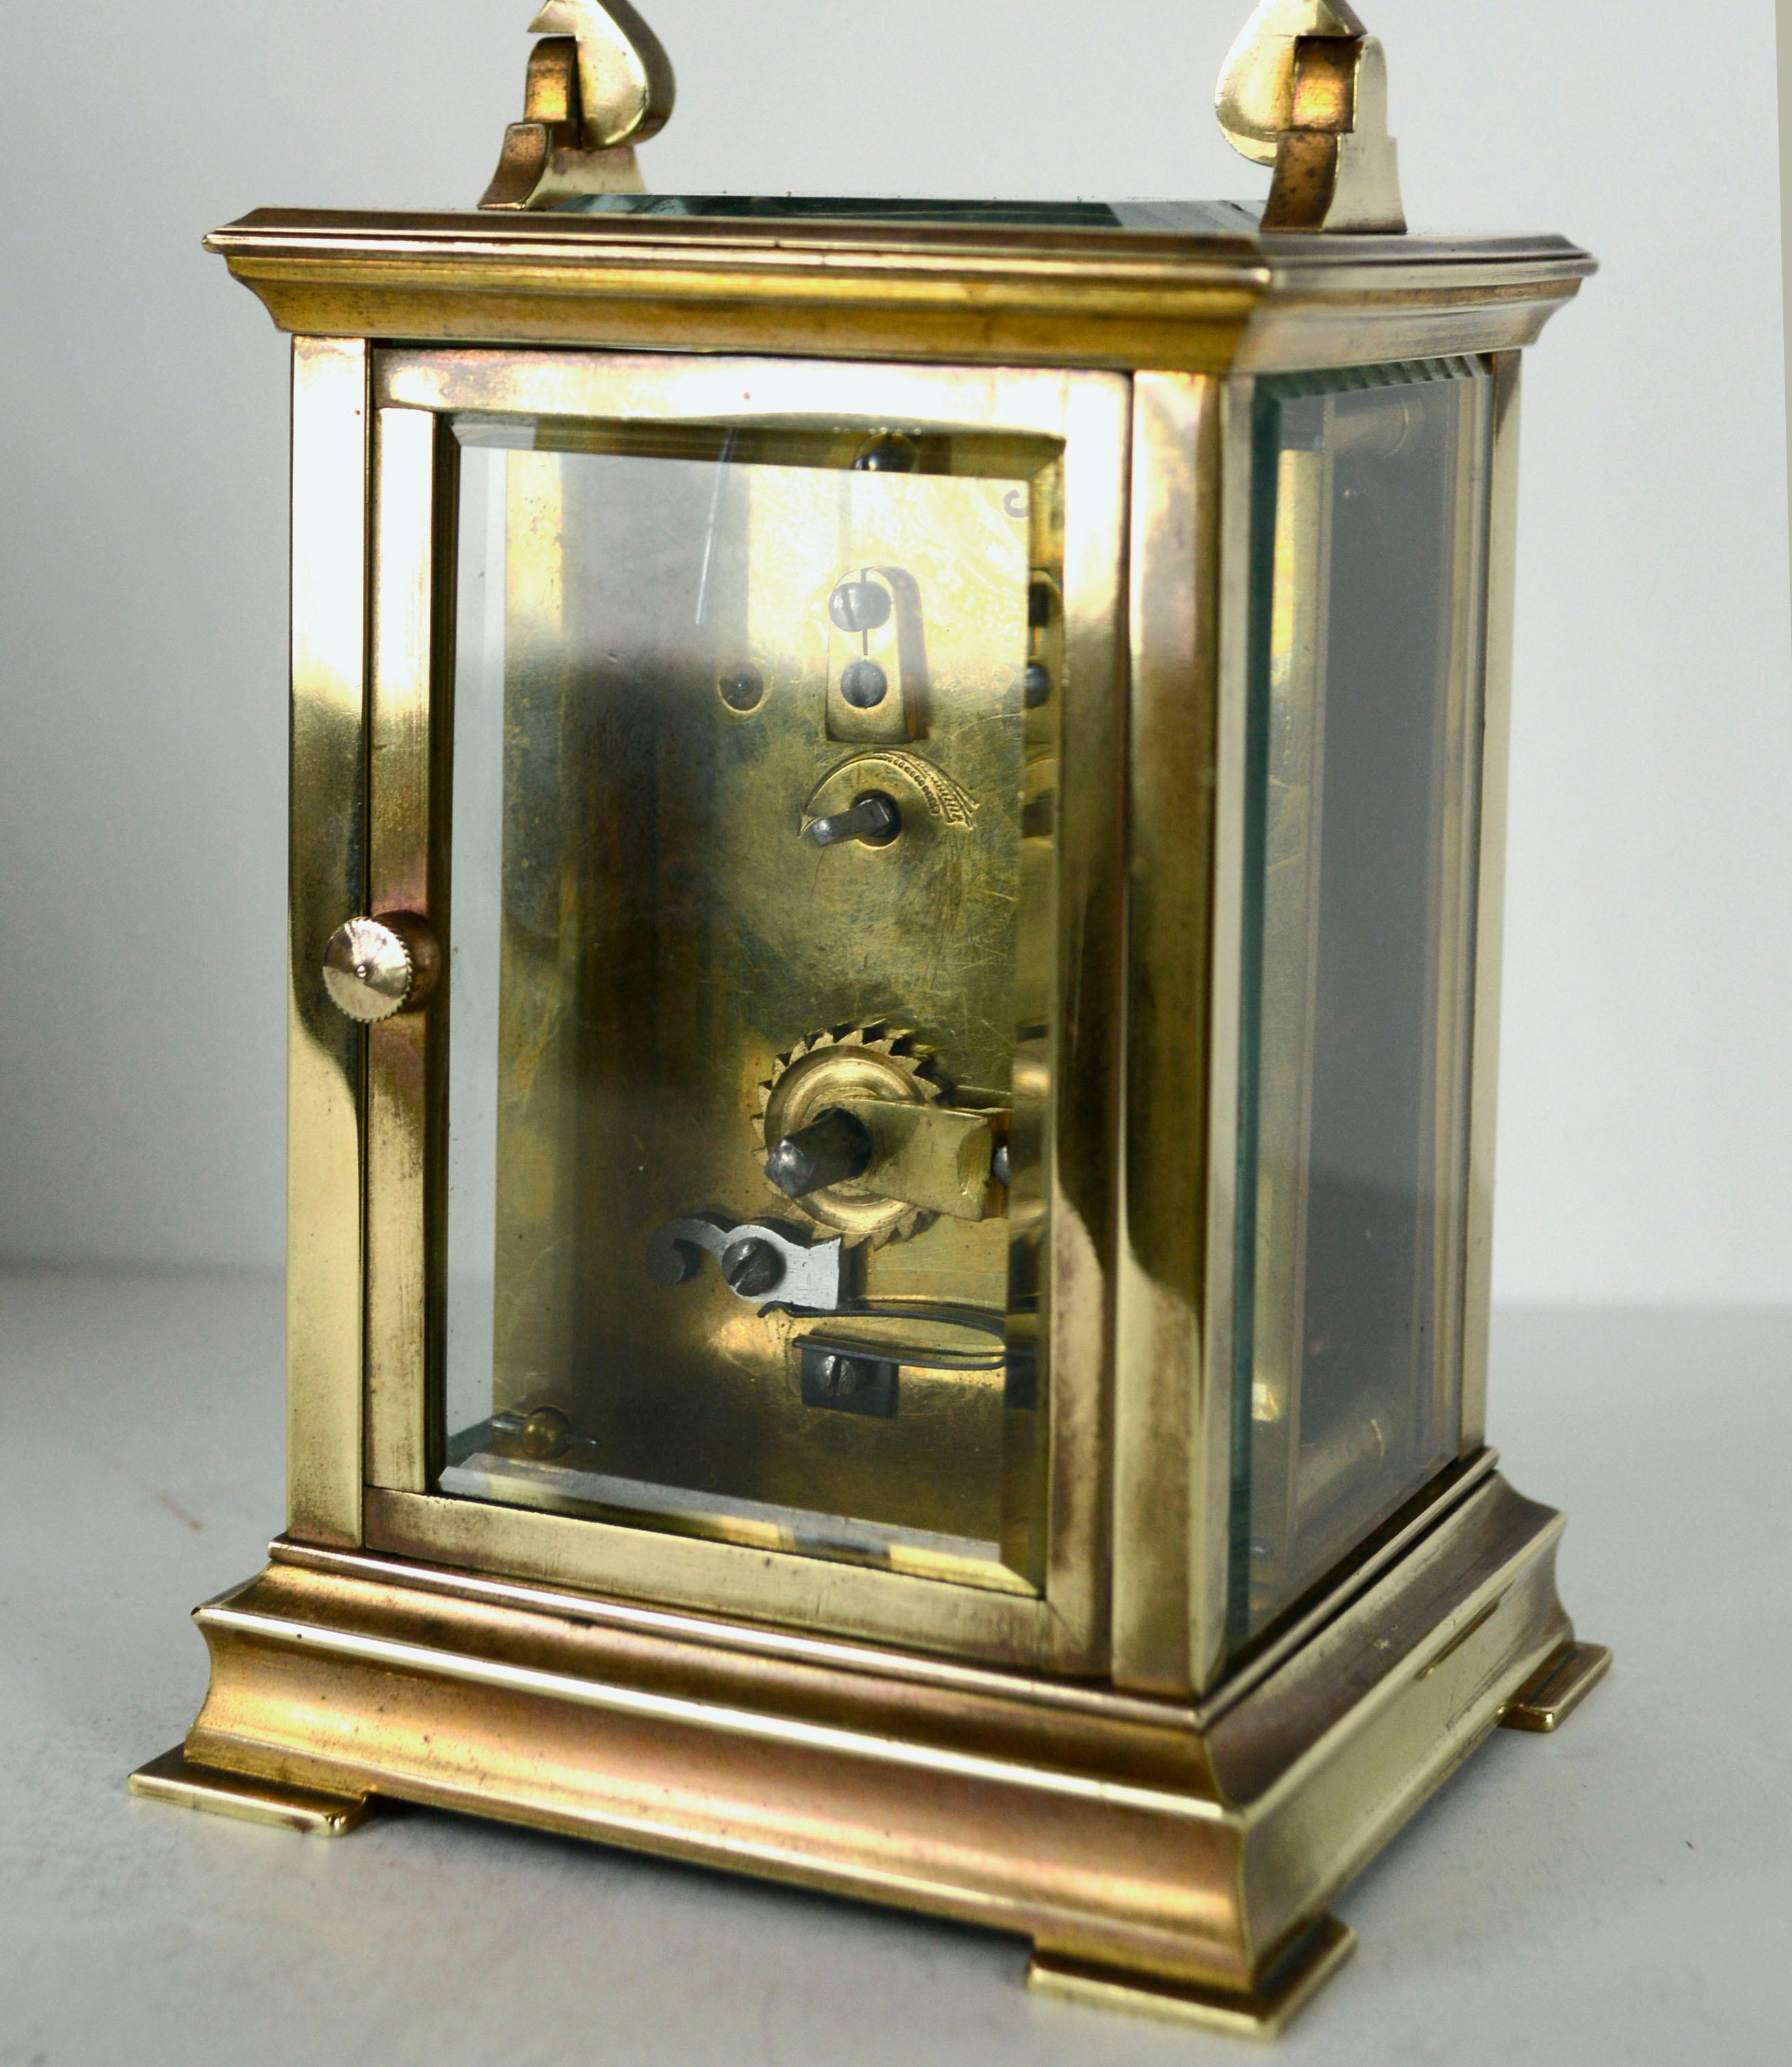 French Couaillet Freres Carriage Clock of Saint-Nicolas-D'Aliermont, Russell's 7